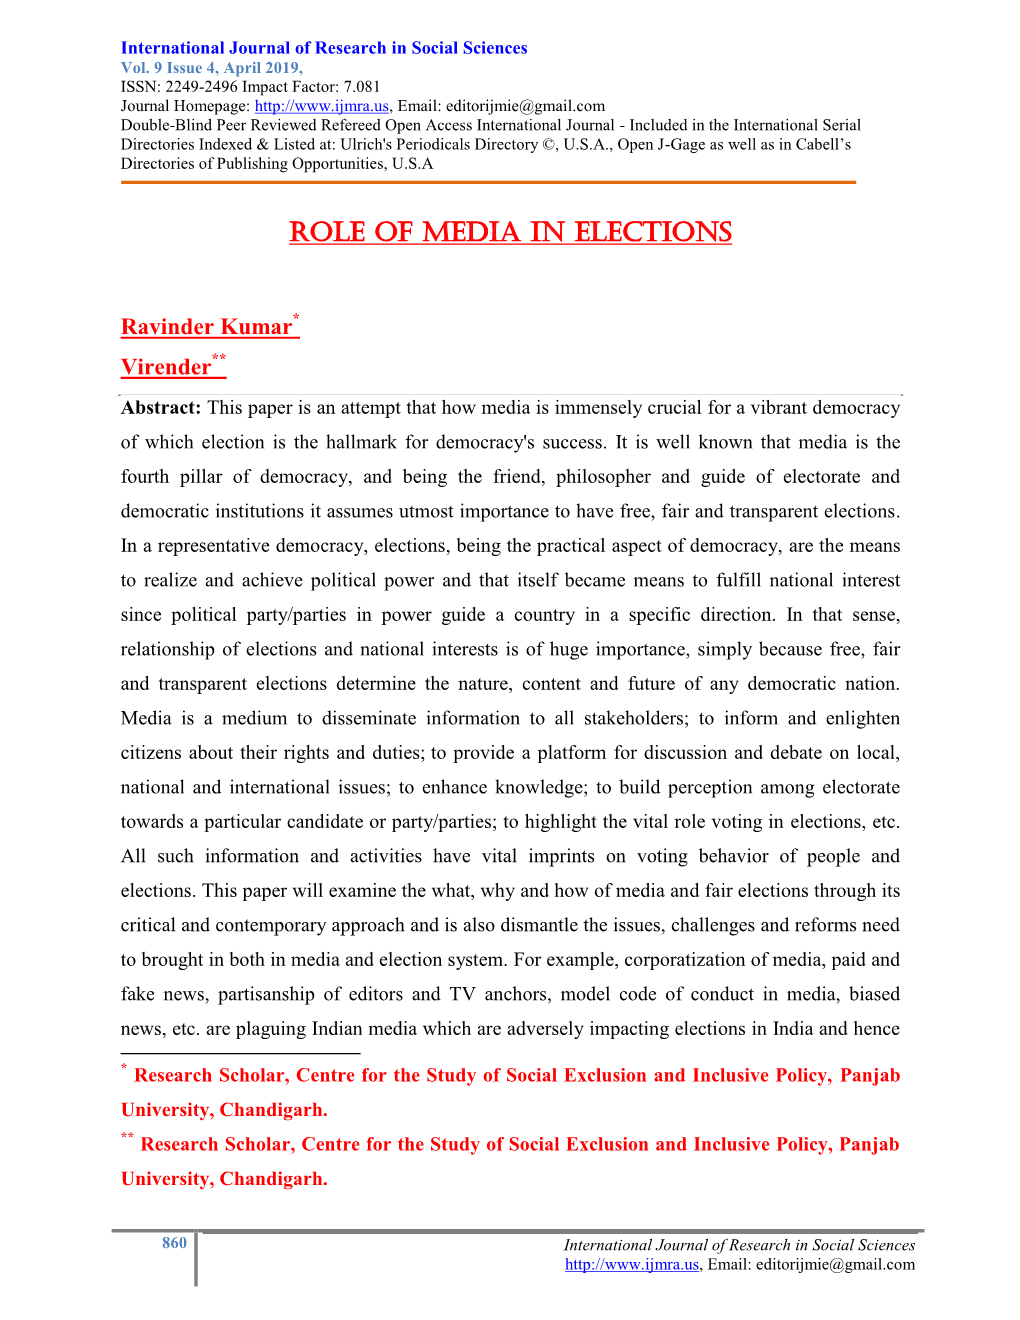 Role of Media in Elections